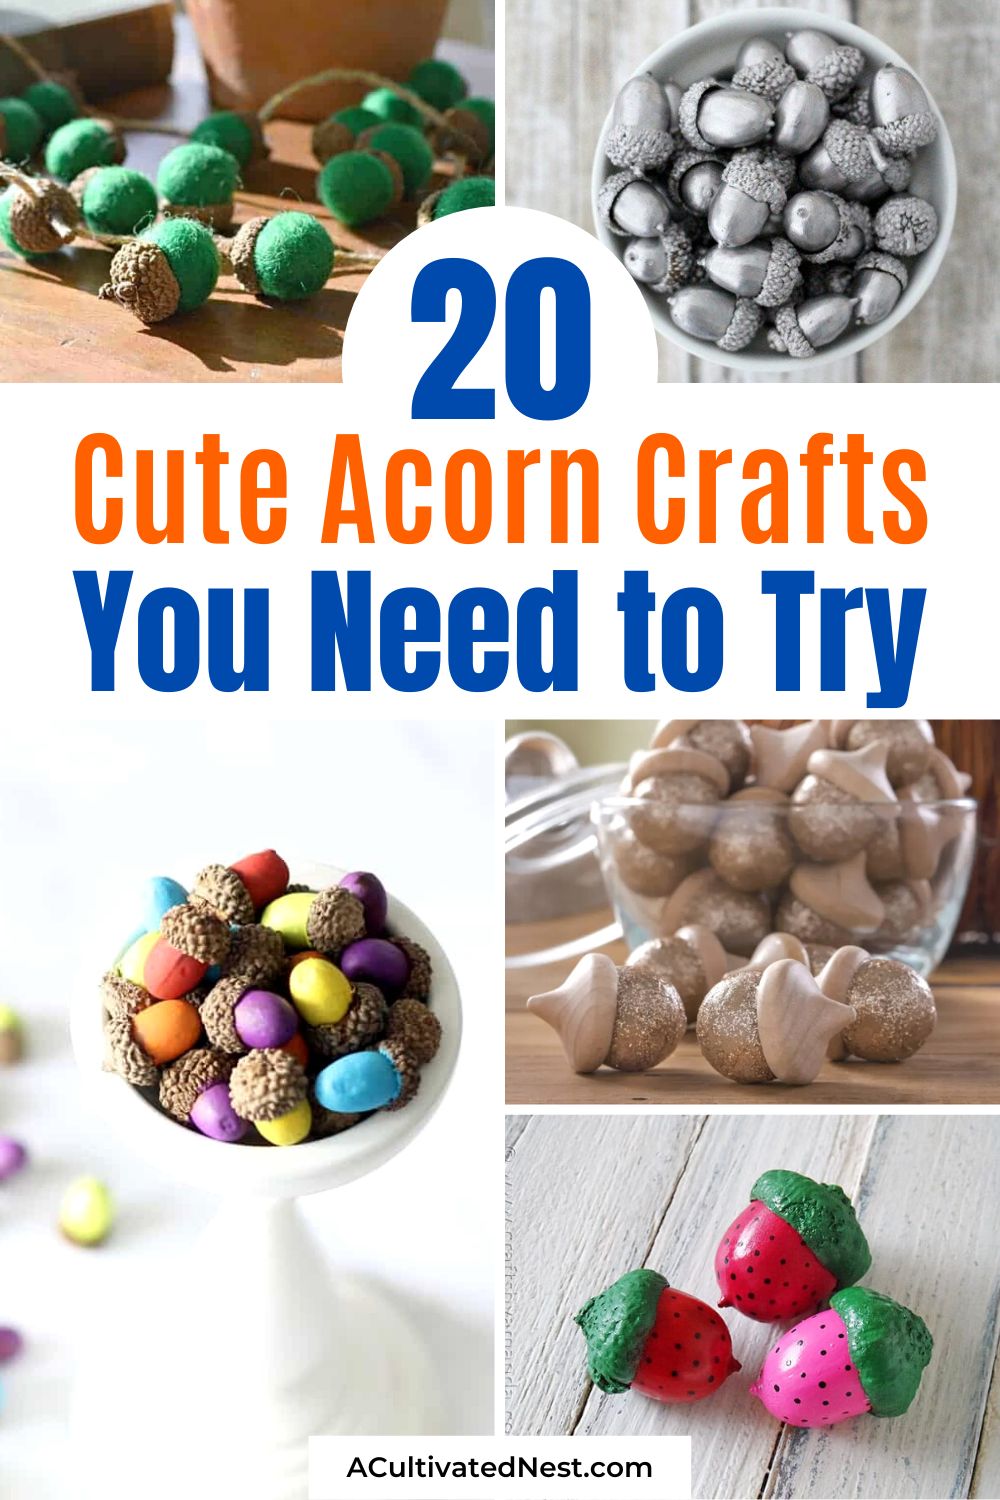 20 Fun Acorn Crafts- Acorns make wonderful décor craft materials for fall, and other times of the year, too! Check out these cute acorn crafts for fun and frugal craft ideas! | #crafts #acorns #fallCrafts #fallDecor #ACultivatedNest